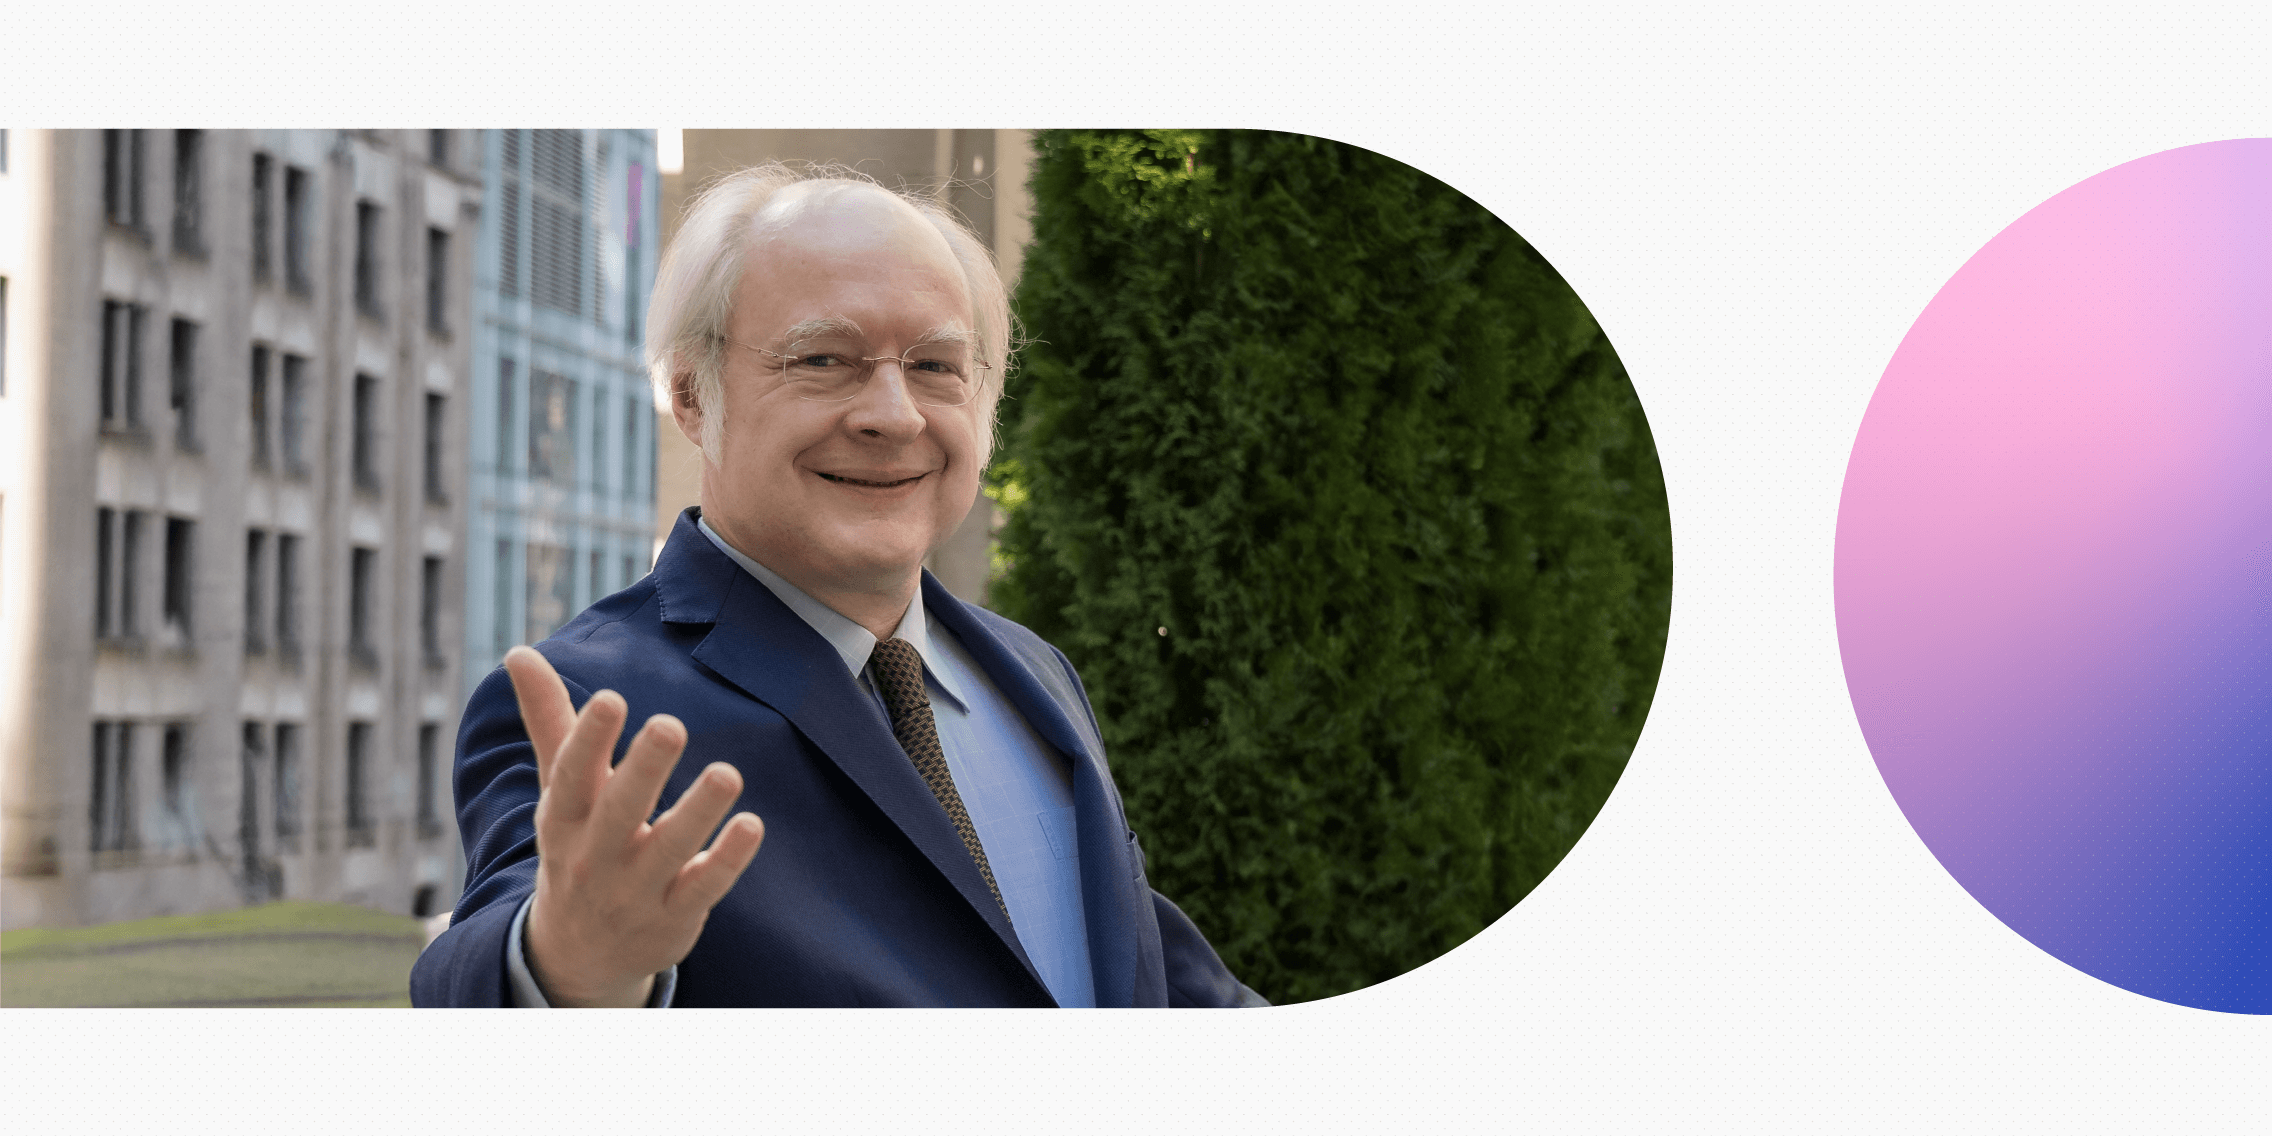 A picture of Jakob Nielsen used as a featured image for the blog